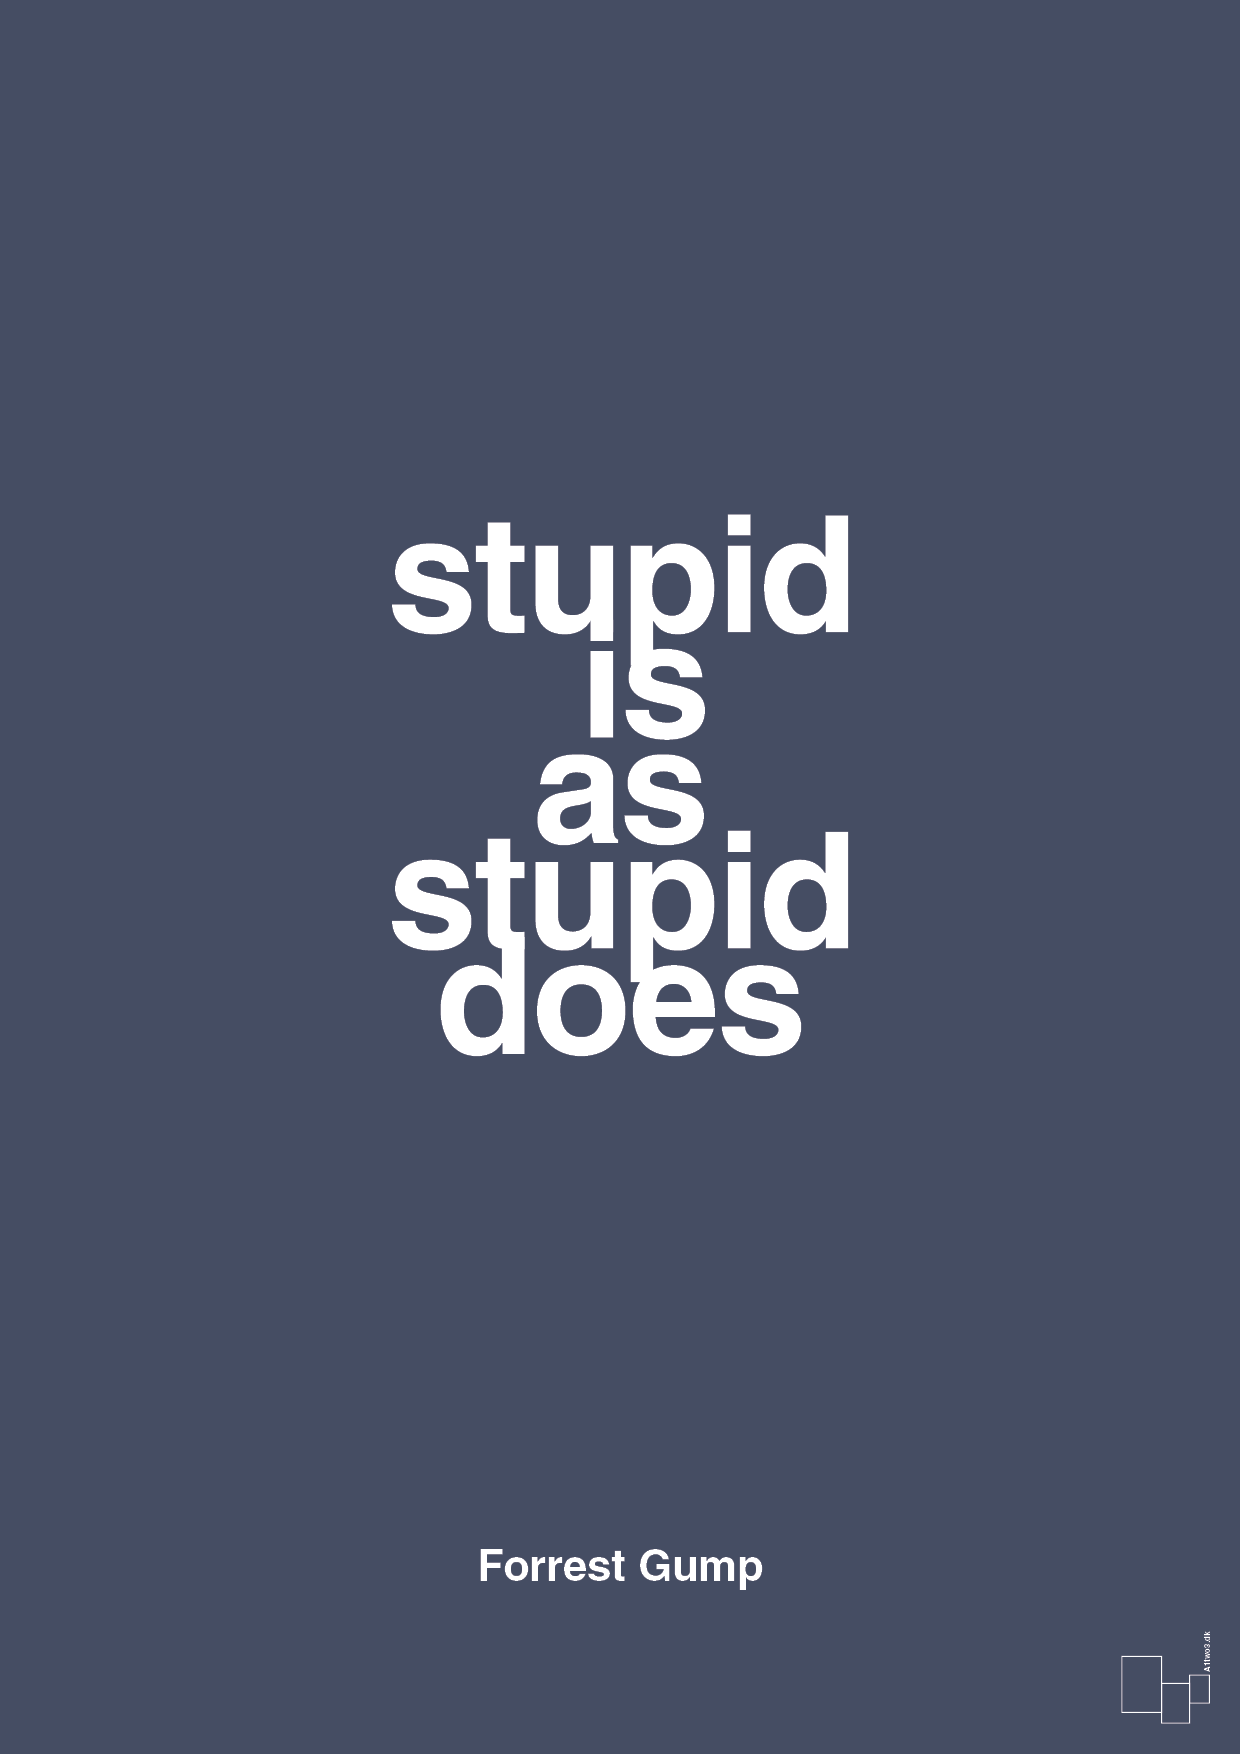 stupid is as stupid does - Plakat med Citater i Petrol